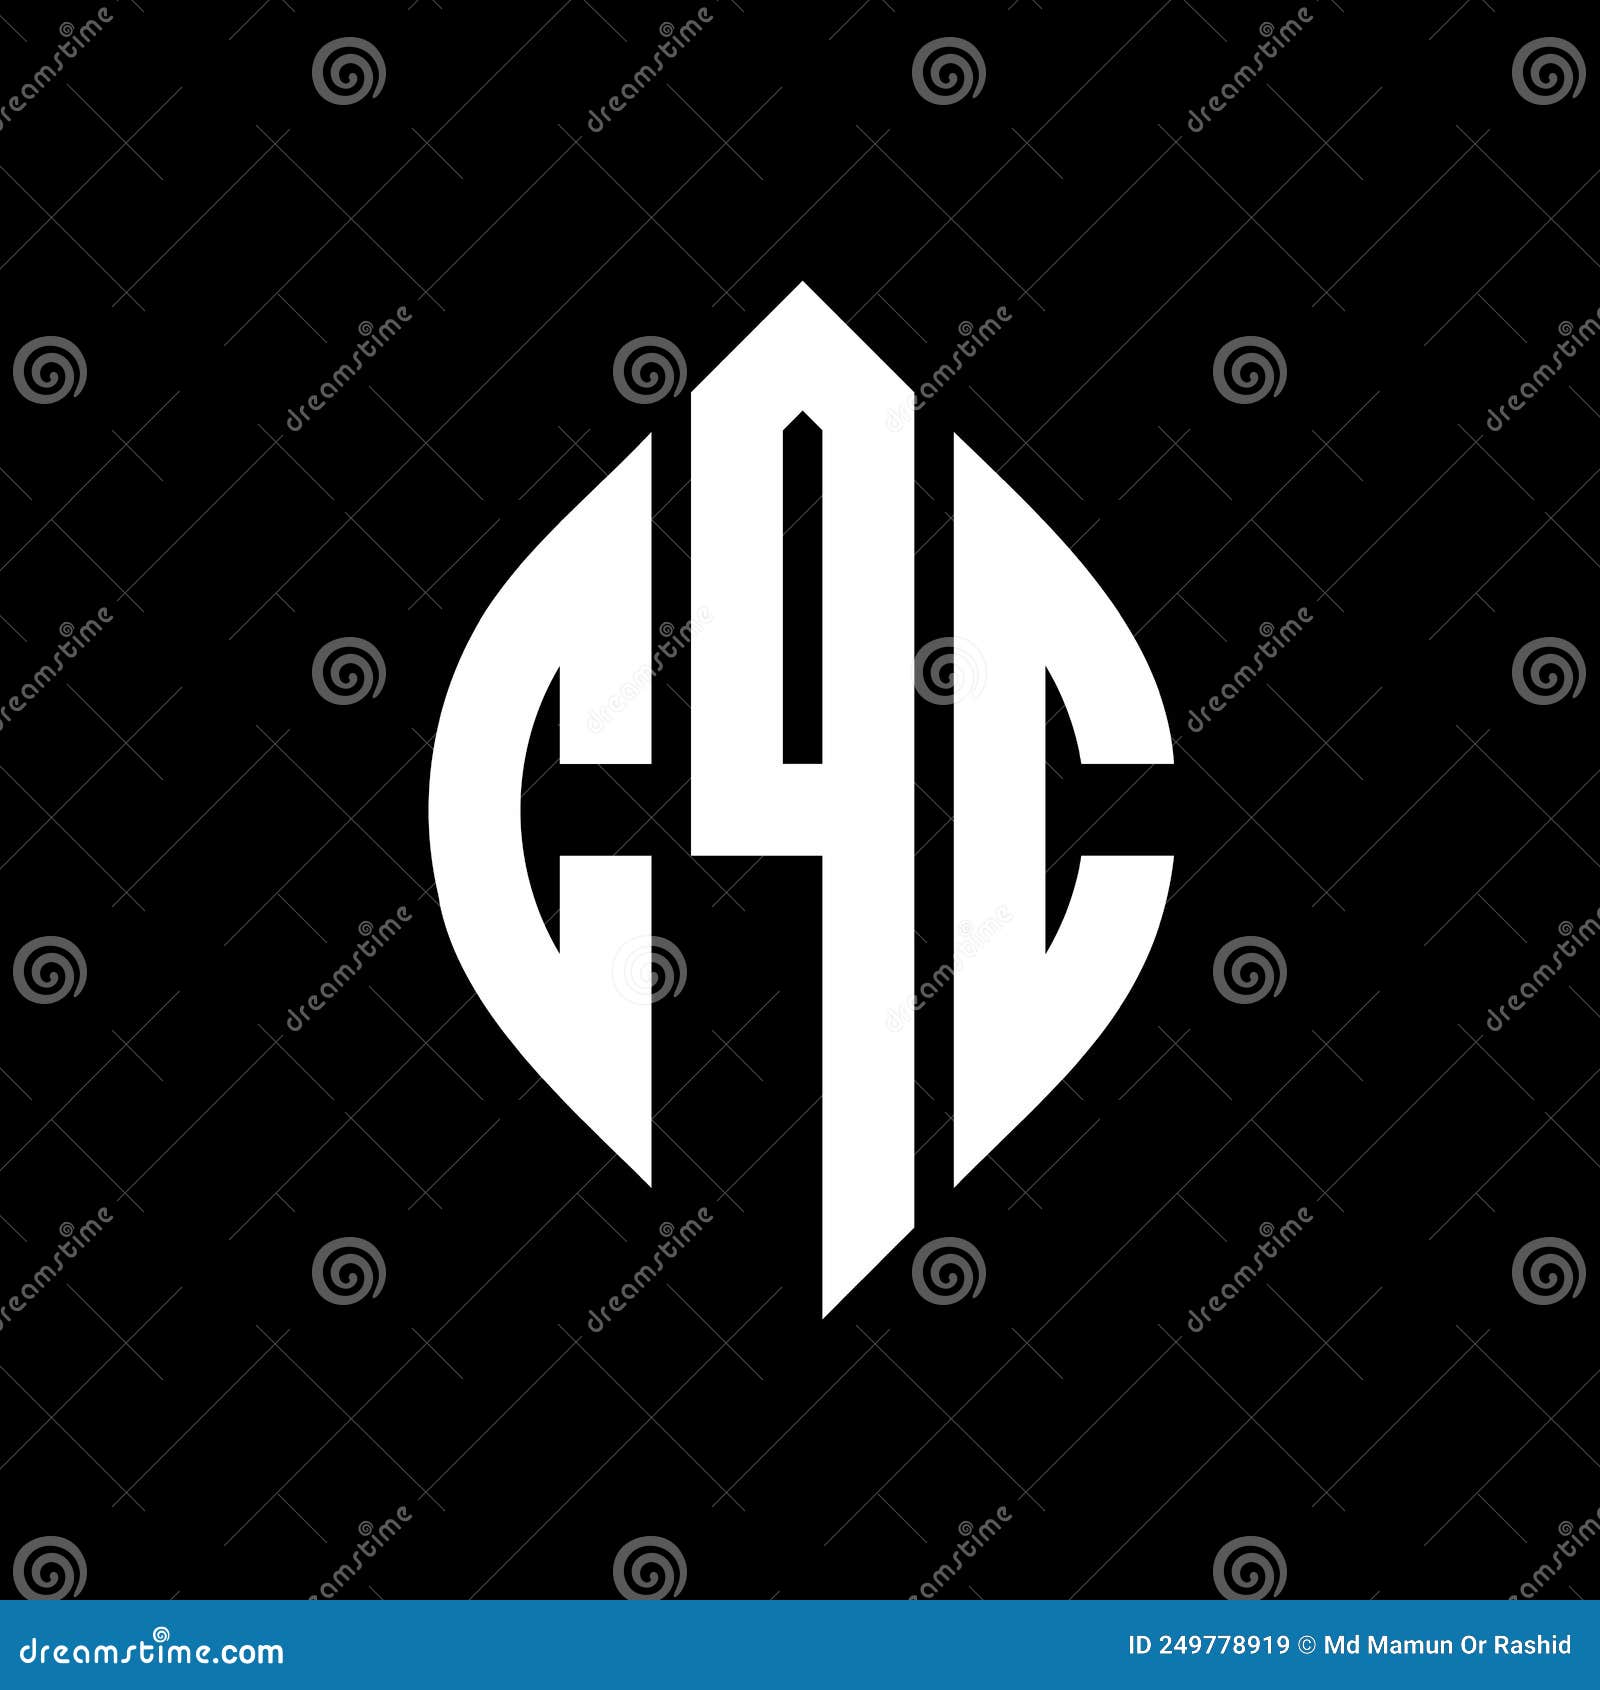 cqc circle letter logo  with circle and ellipse . cqc ellipse letters with typographic style. the three initials form a